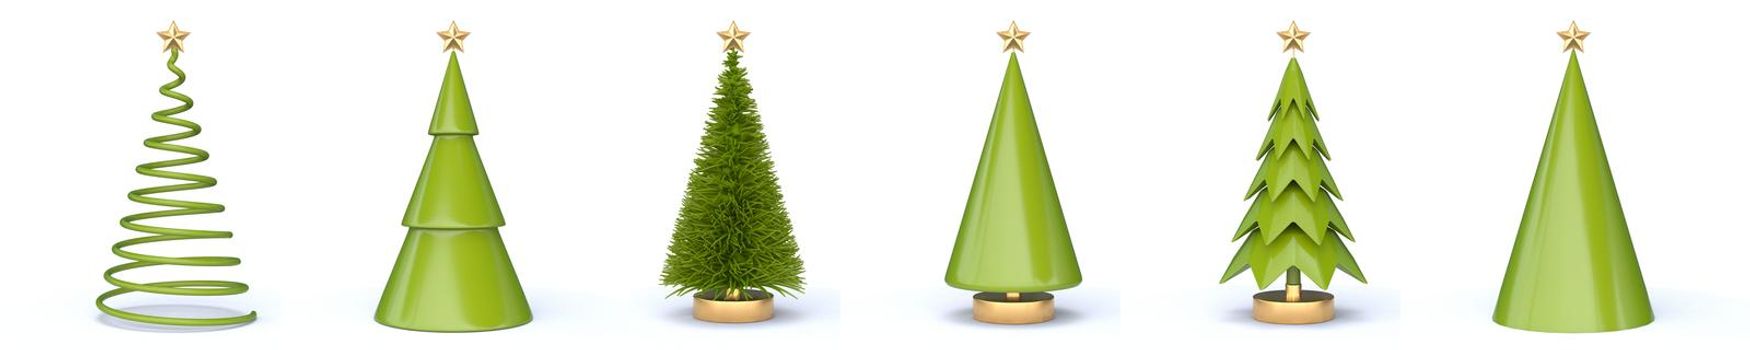 Set of Christmas trees with golden Christmas star 3D rendering illustration isolated on white background